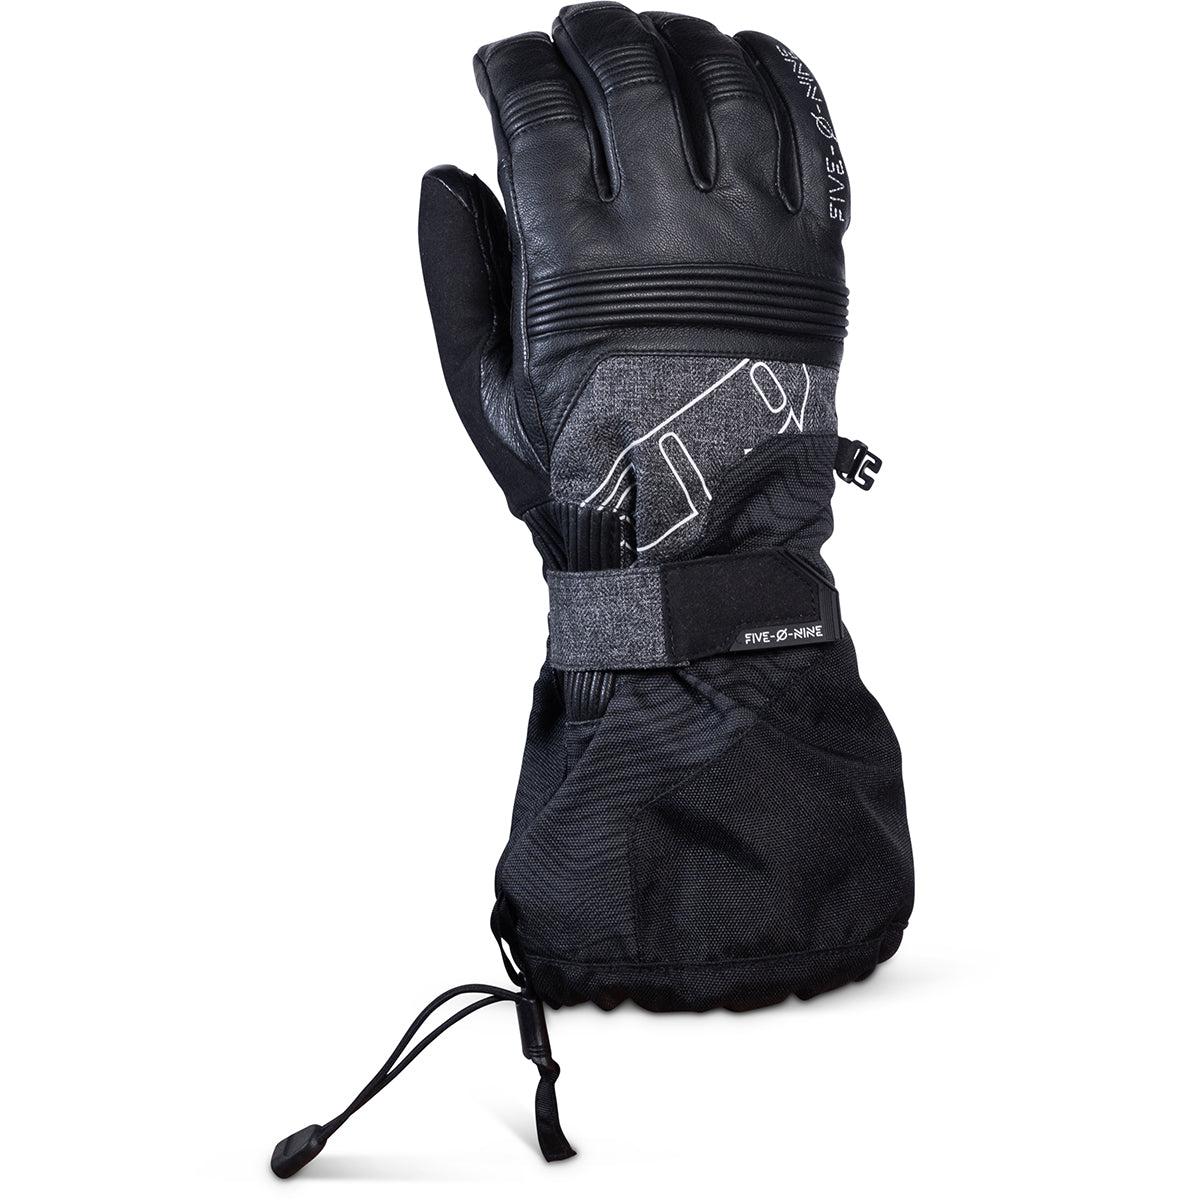 Range Insulated Gloves - Black Ops / XS